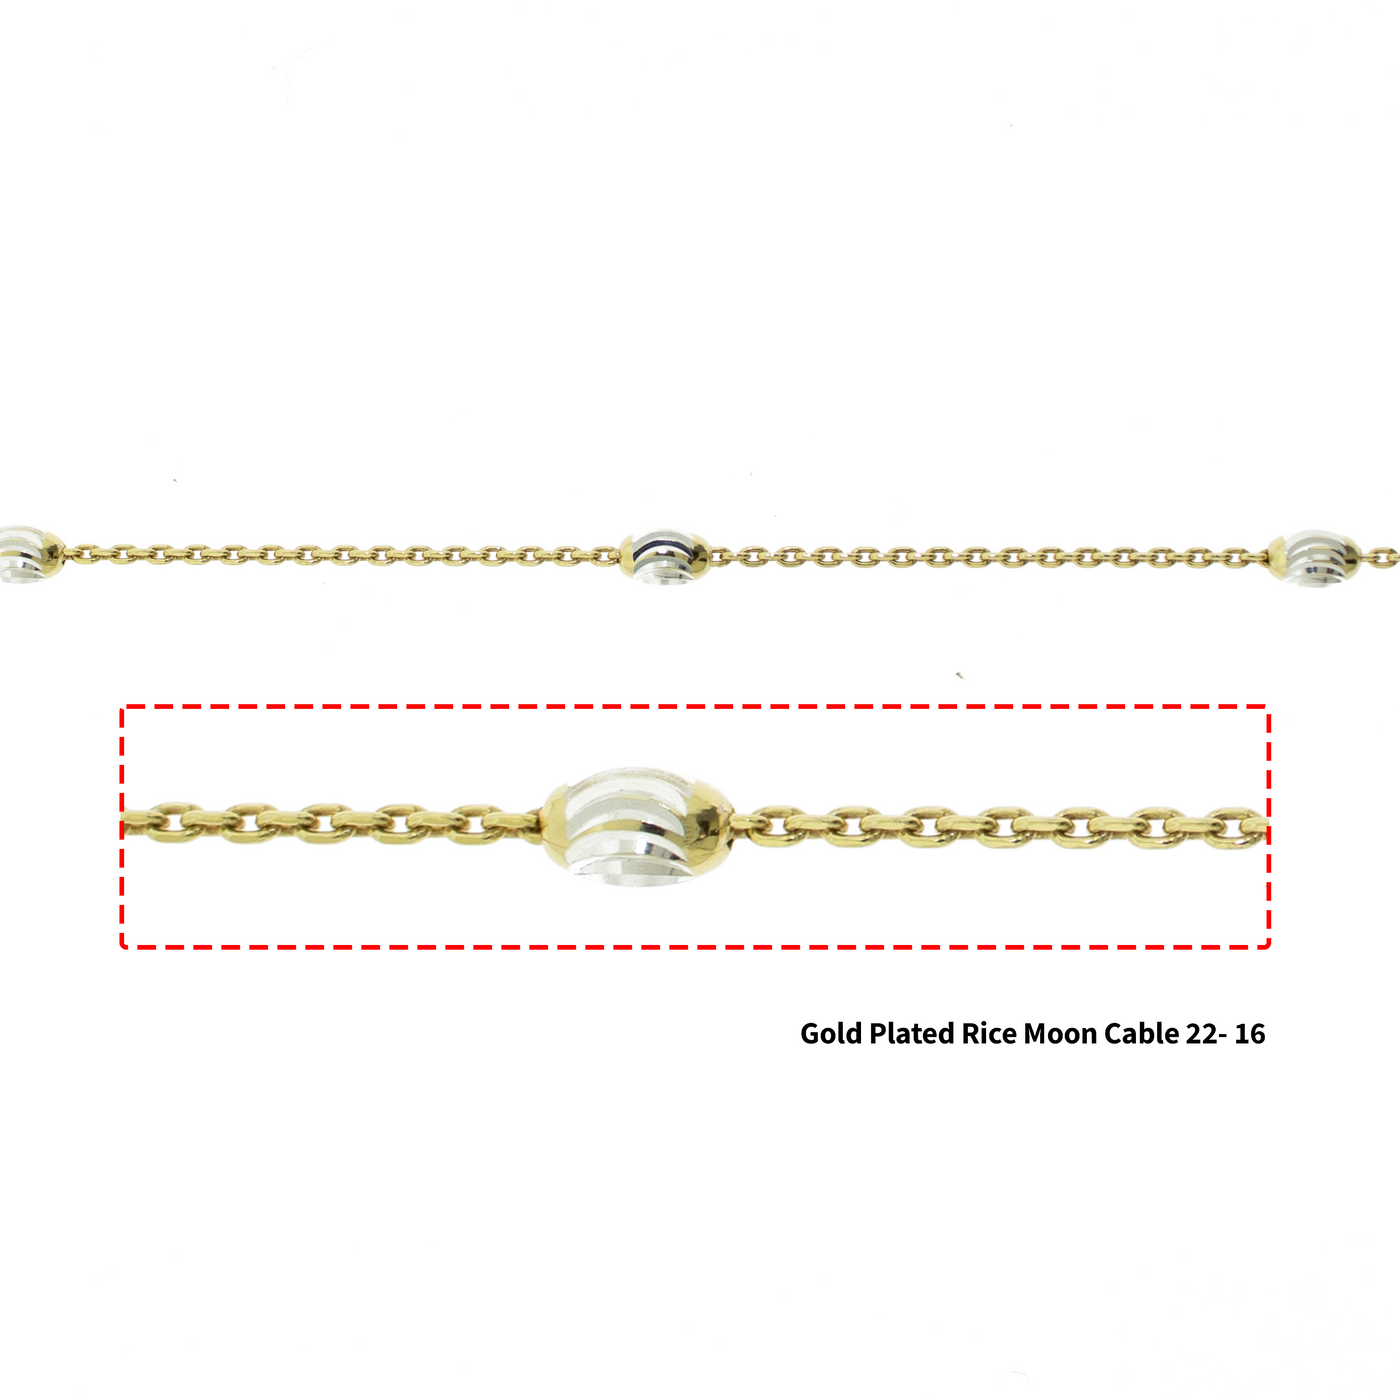 Rise Moon Cable Gold Plated